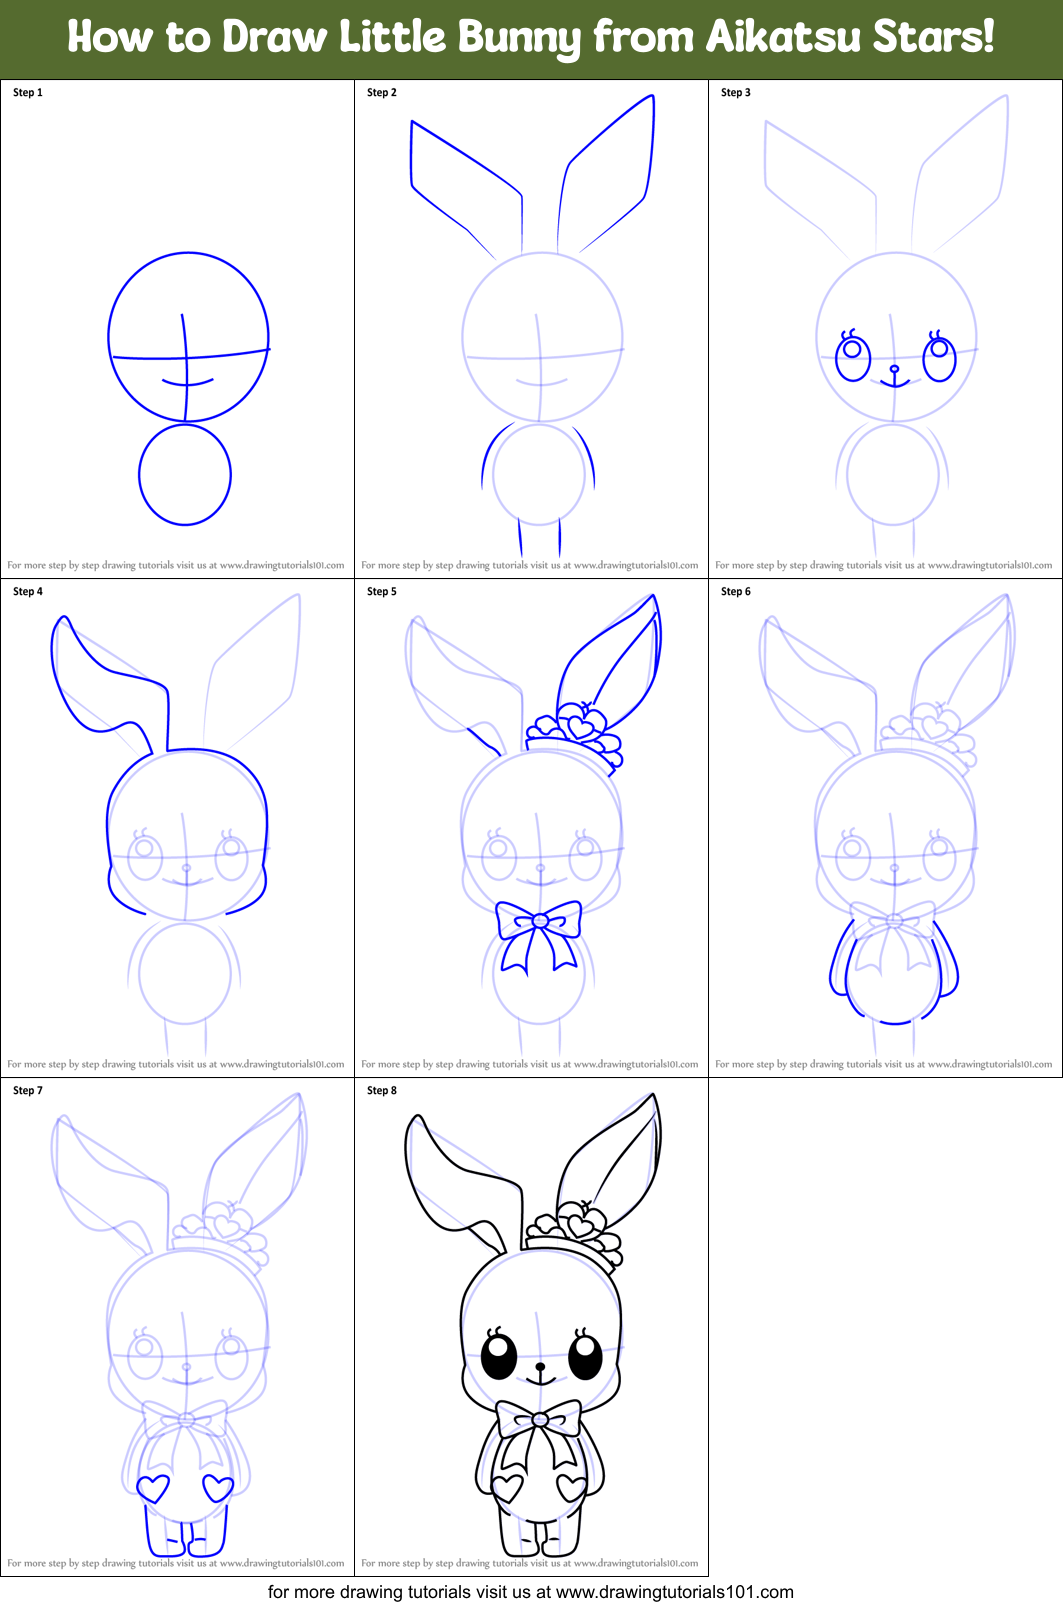 How to Draw Little Bunny from Aikatsu Stars! printable step by step